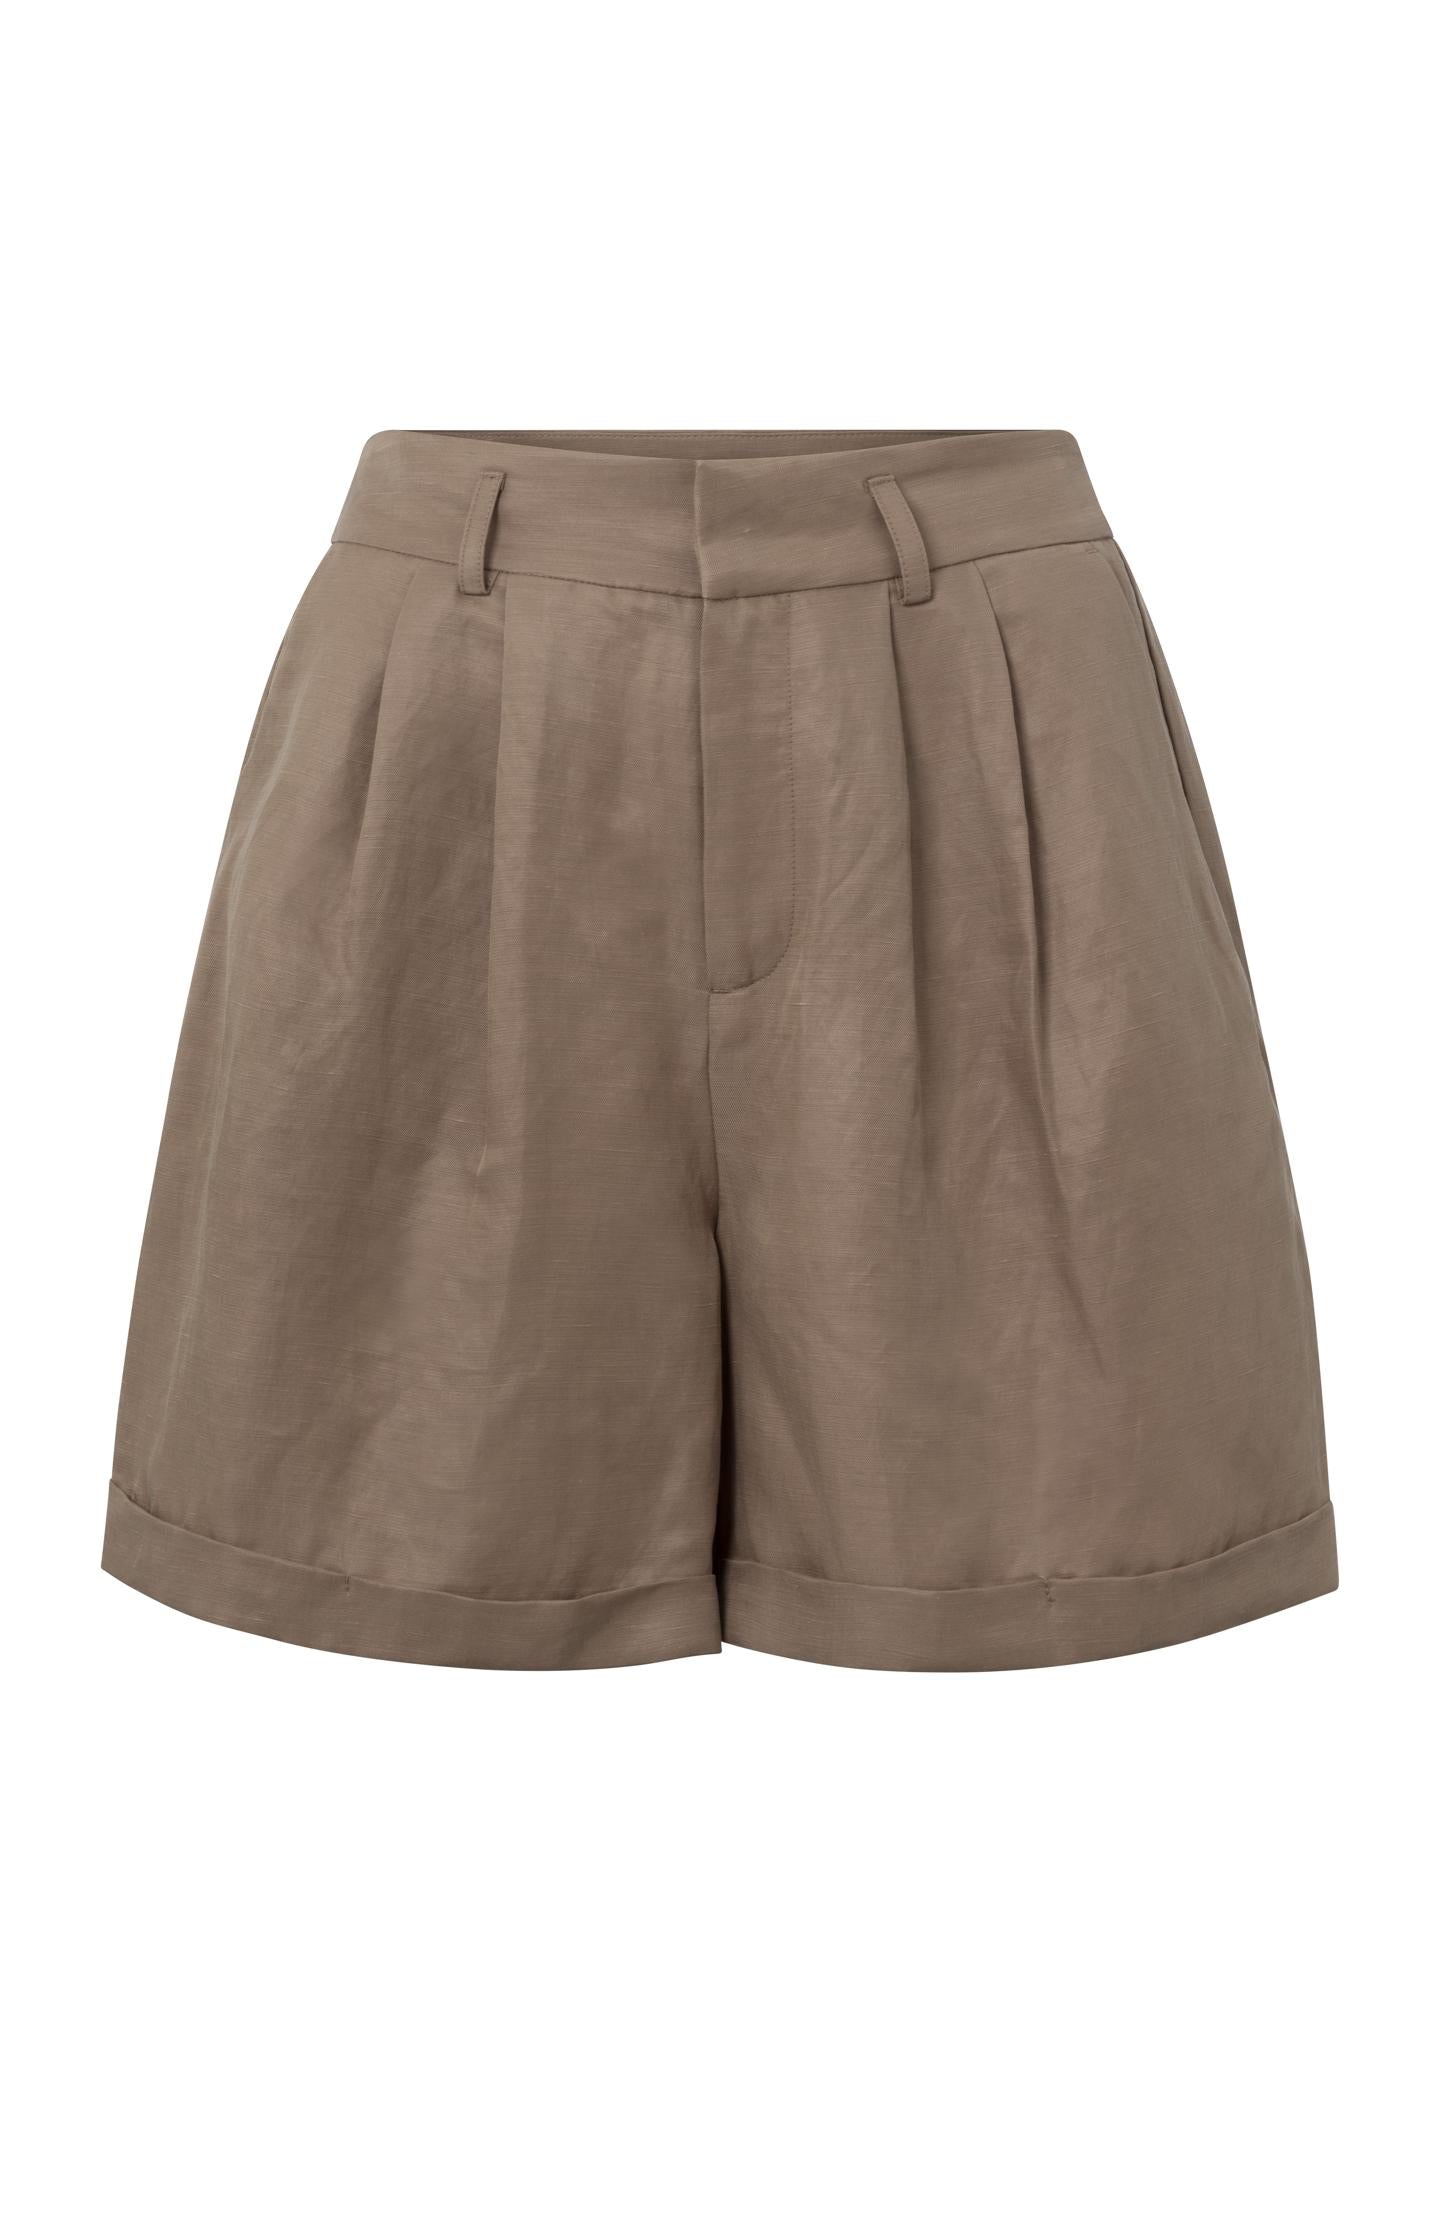 Woven short with high waist, pockets and pleated details - Type: product